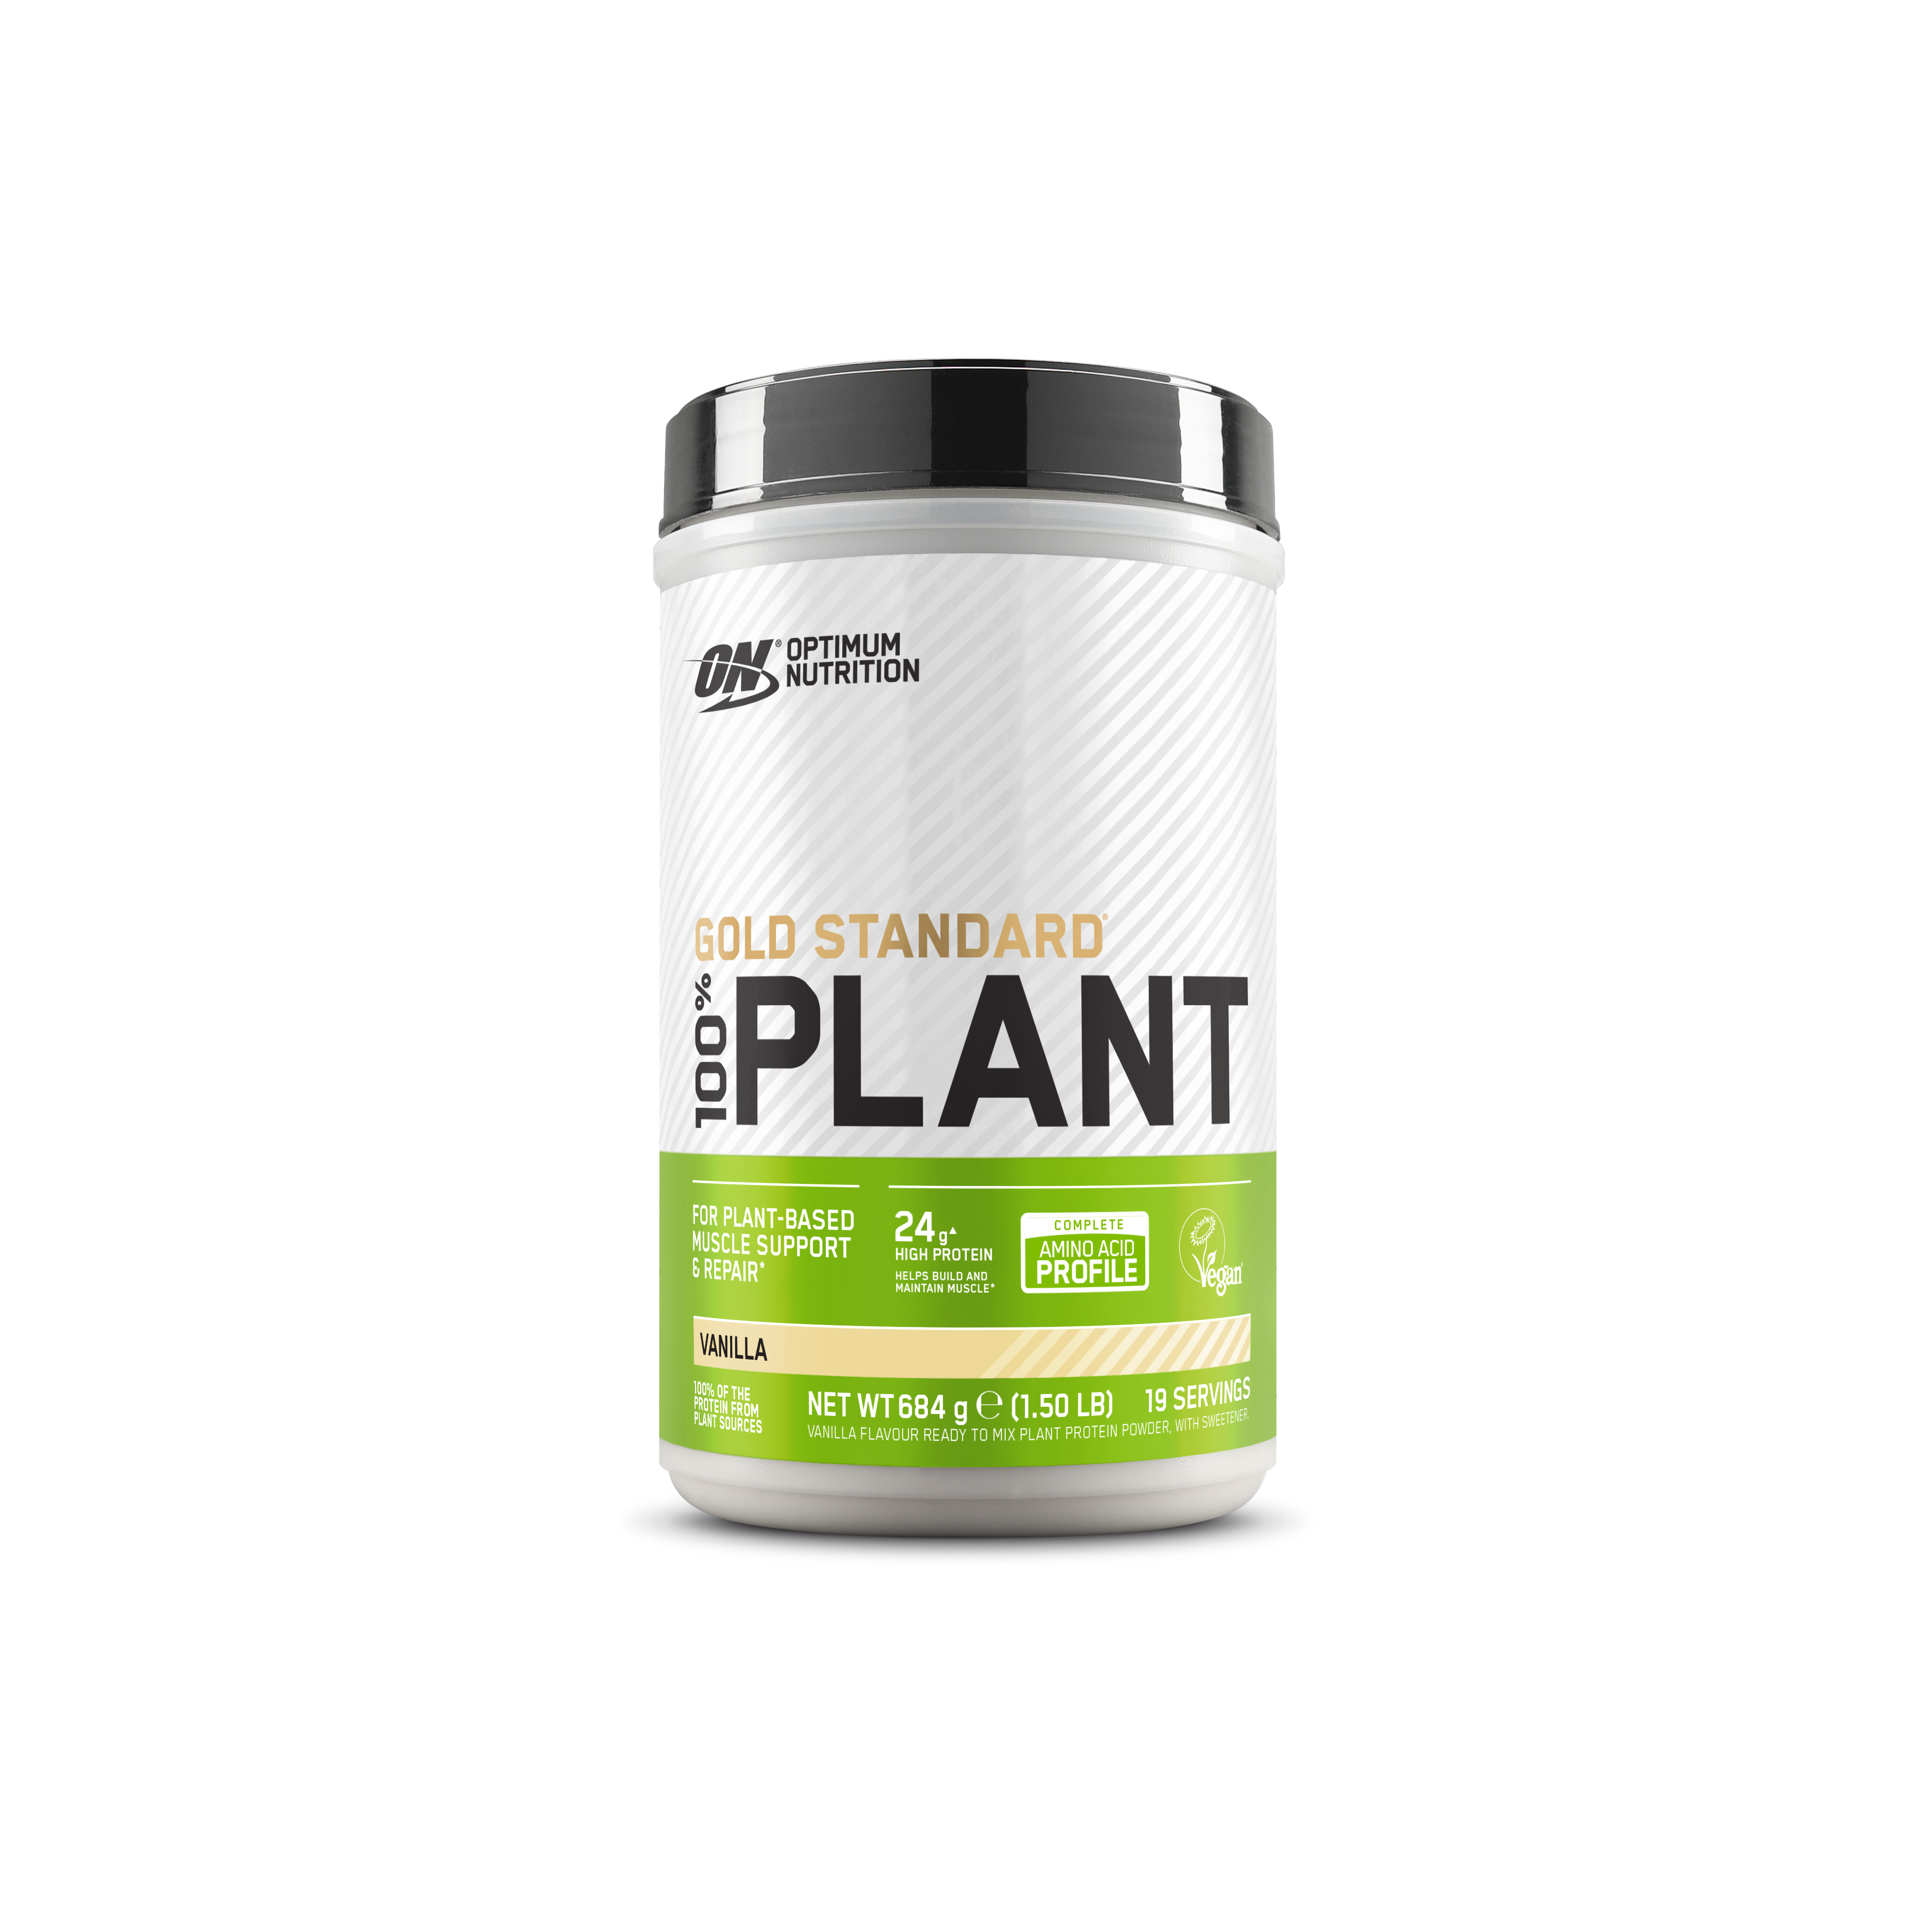 Gold Standard 100% Plant Based Protein Supplement 684 g (19 Shakes)